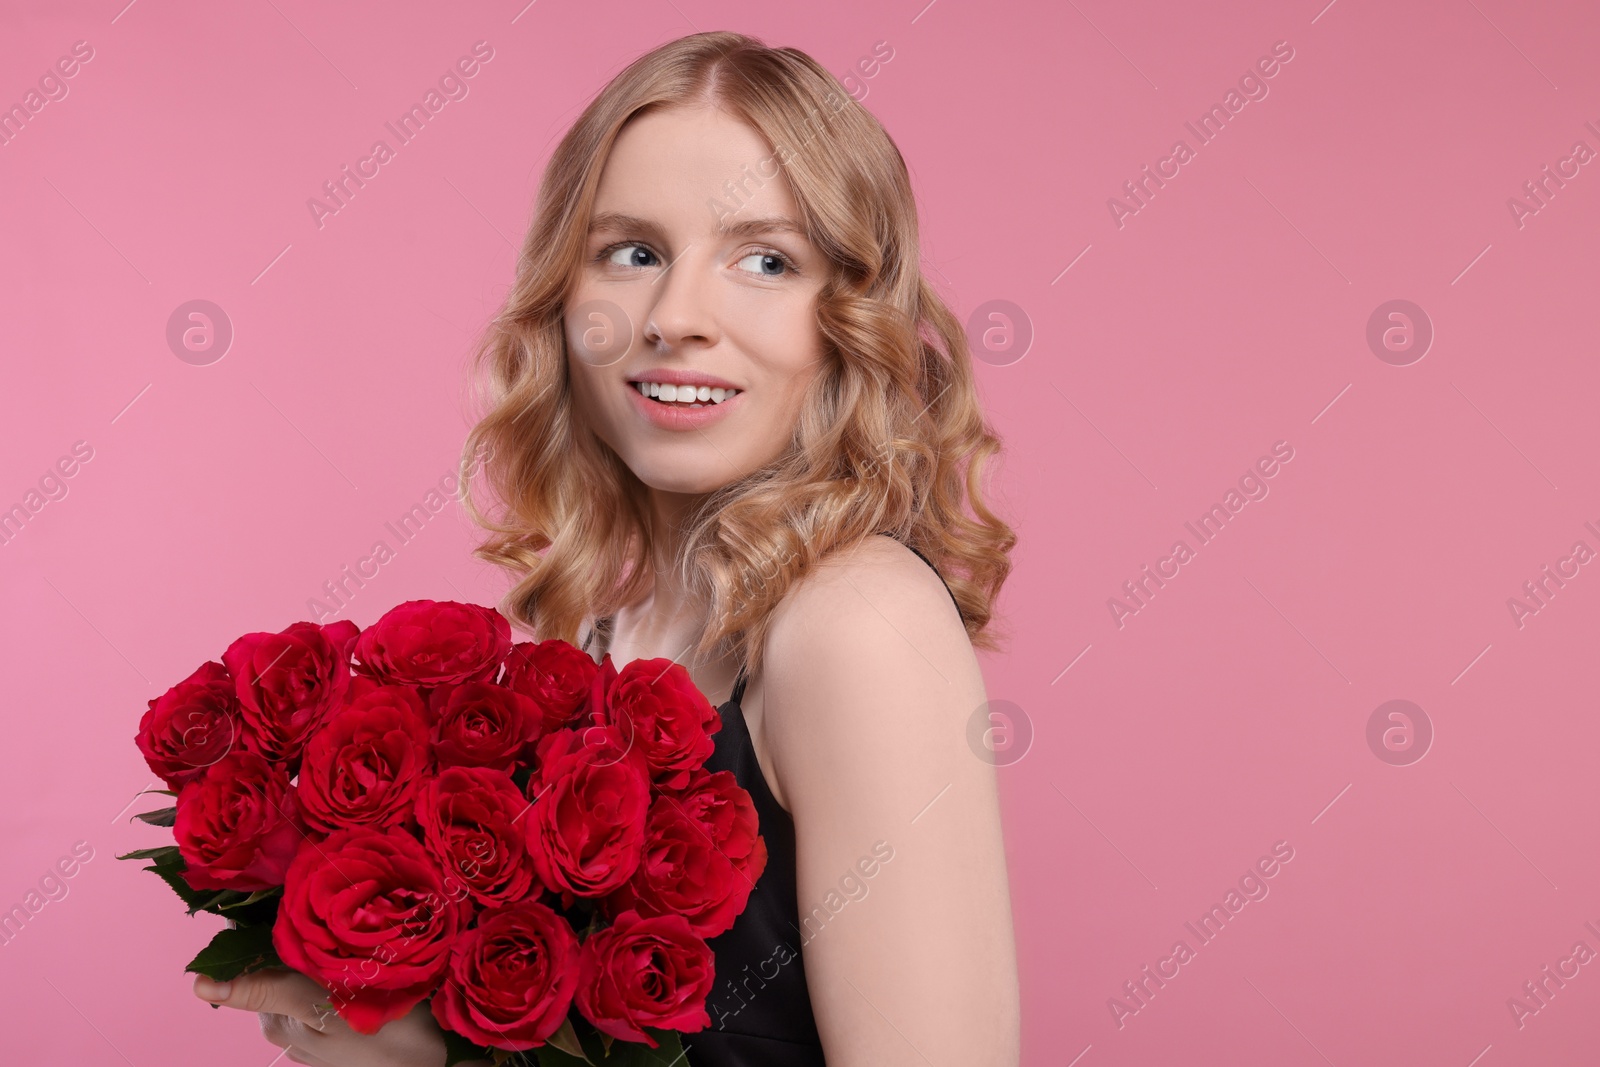 Photo of Beautiful woman with blonde hair holding bouquet of red roses on pink background. Space for text